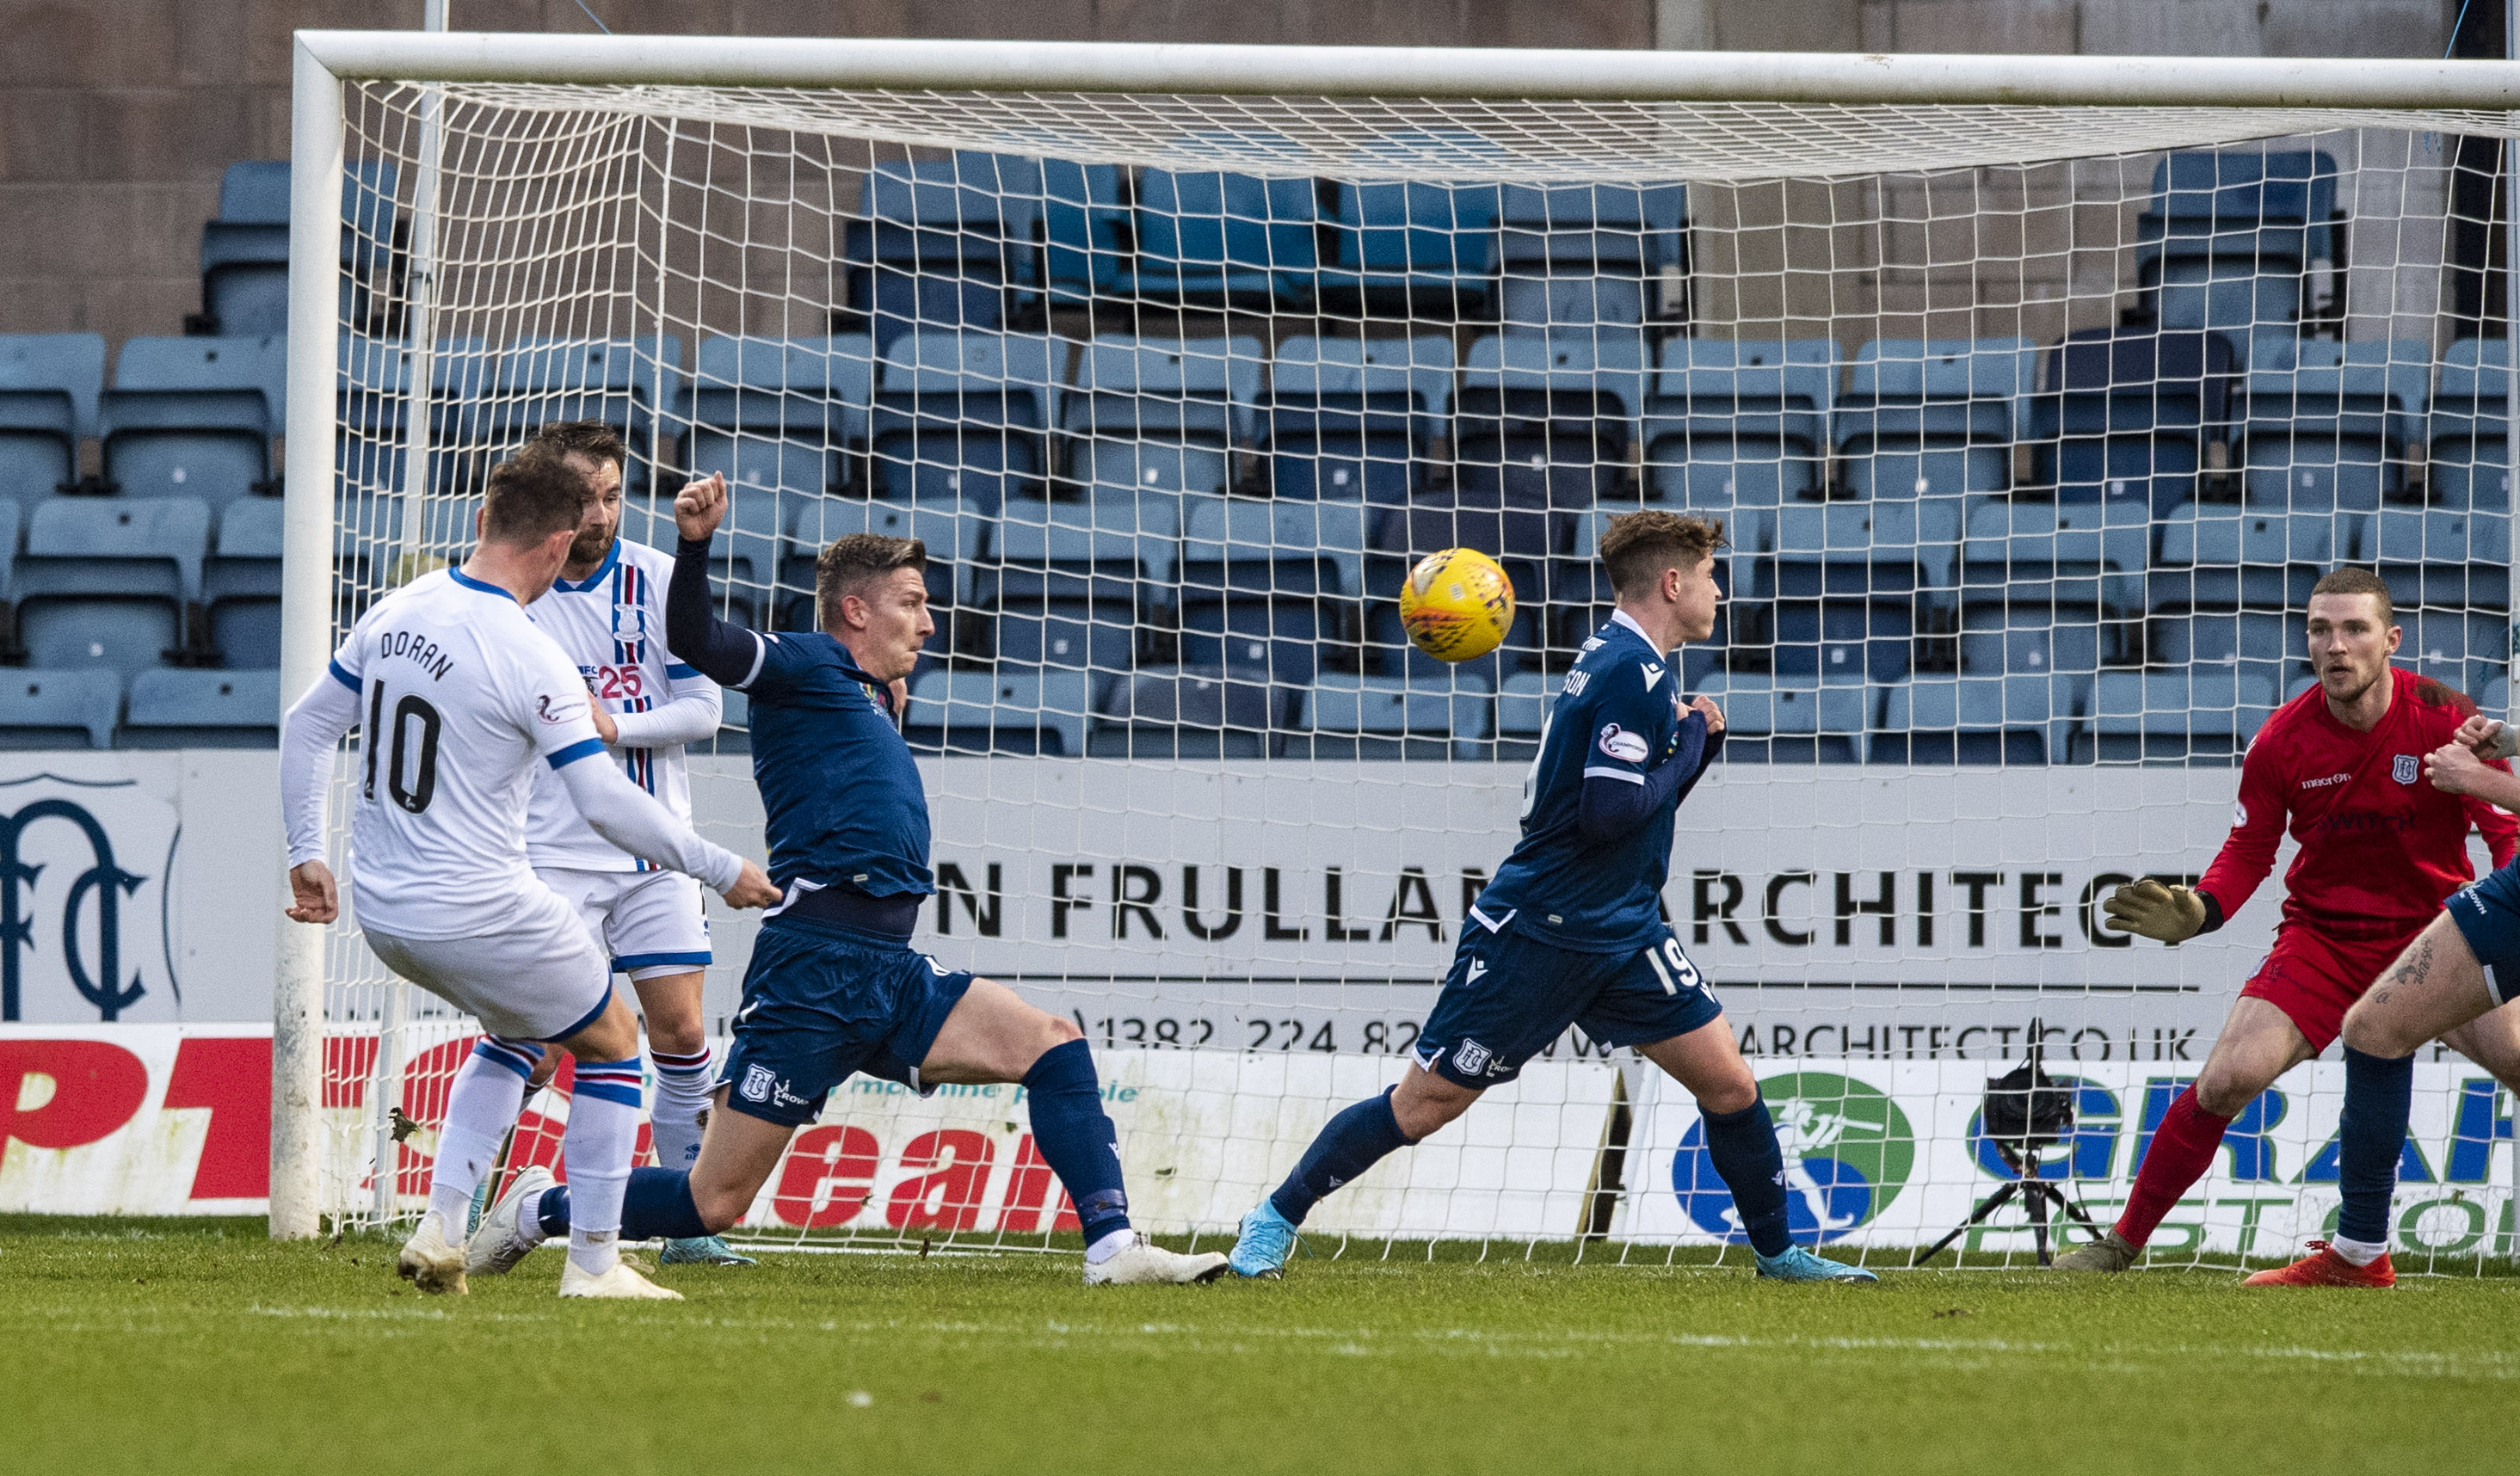 Aaron Doran scores to make it 1-0 during the Ladbrokes Championship match between Dundee and Inverness CT, at the Kilmac Stadium at Dens Park.